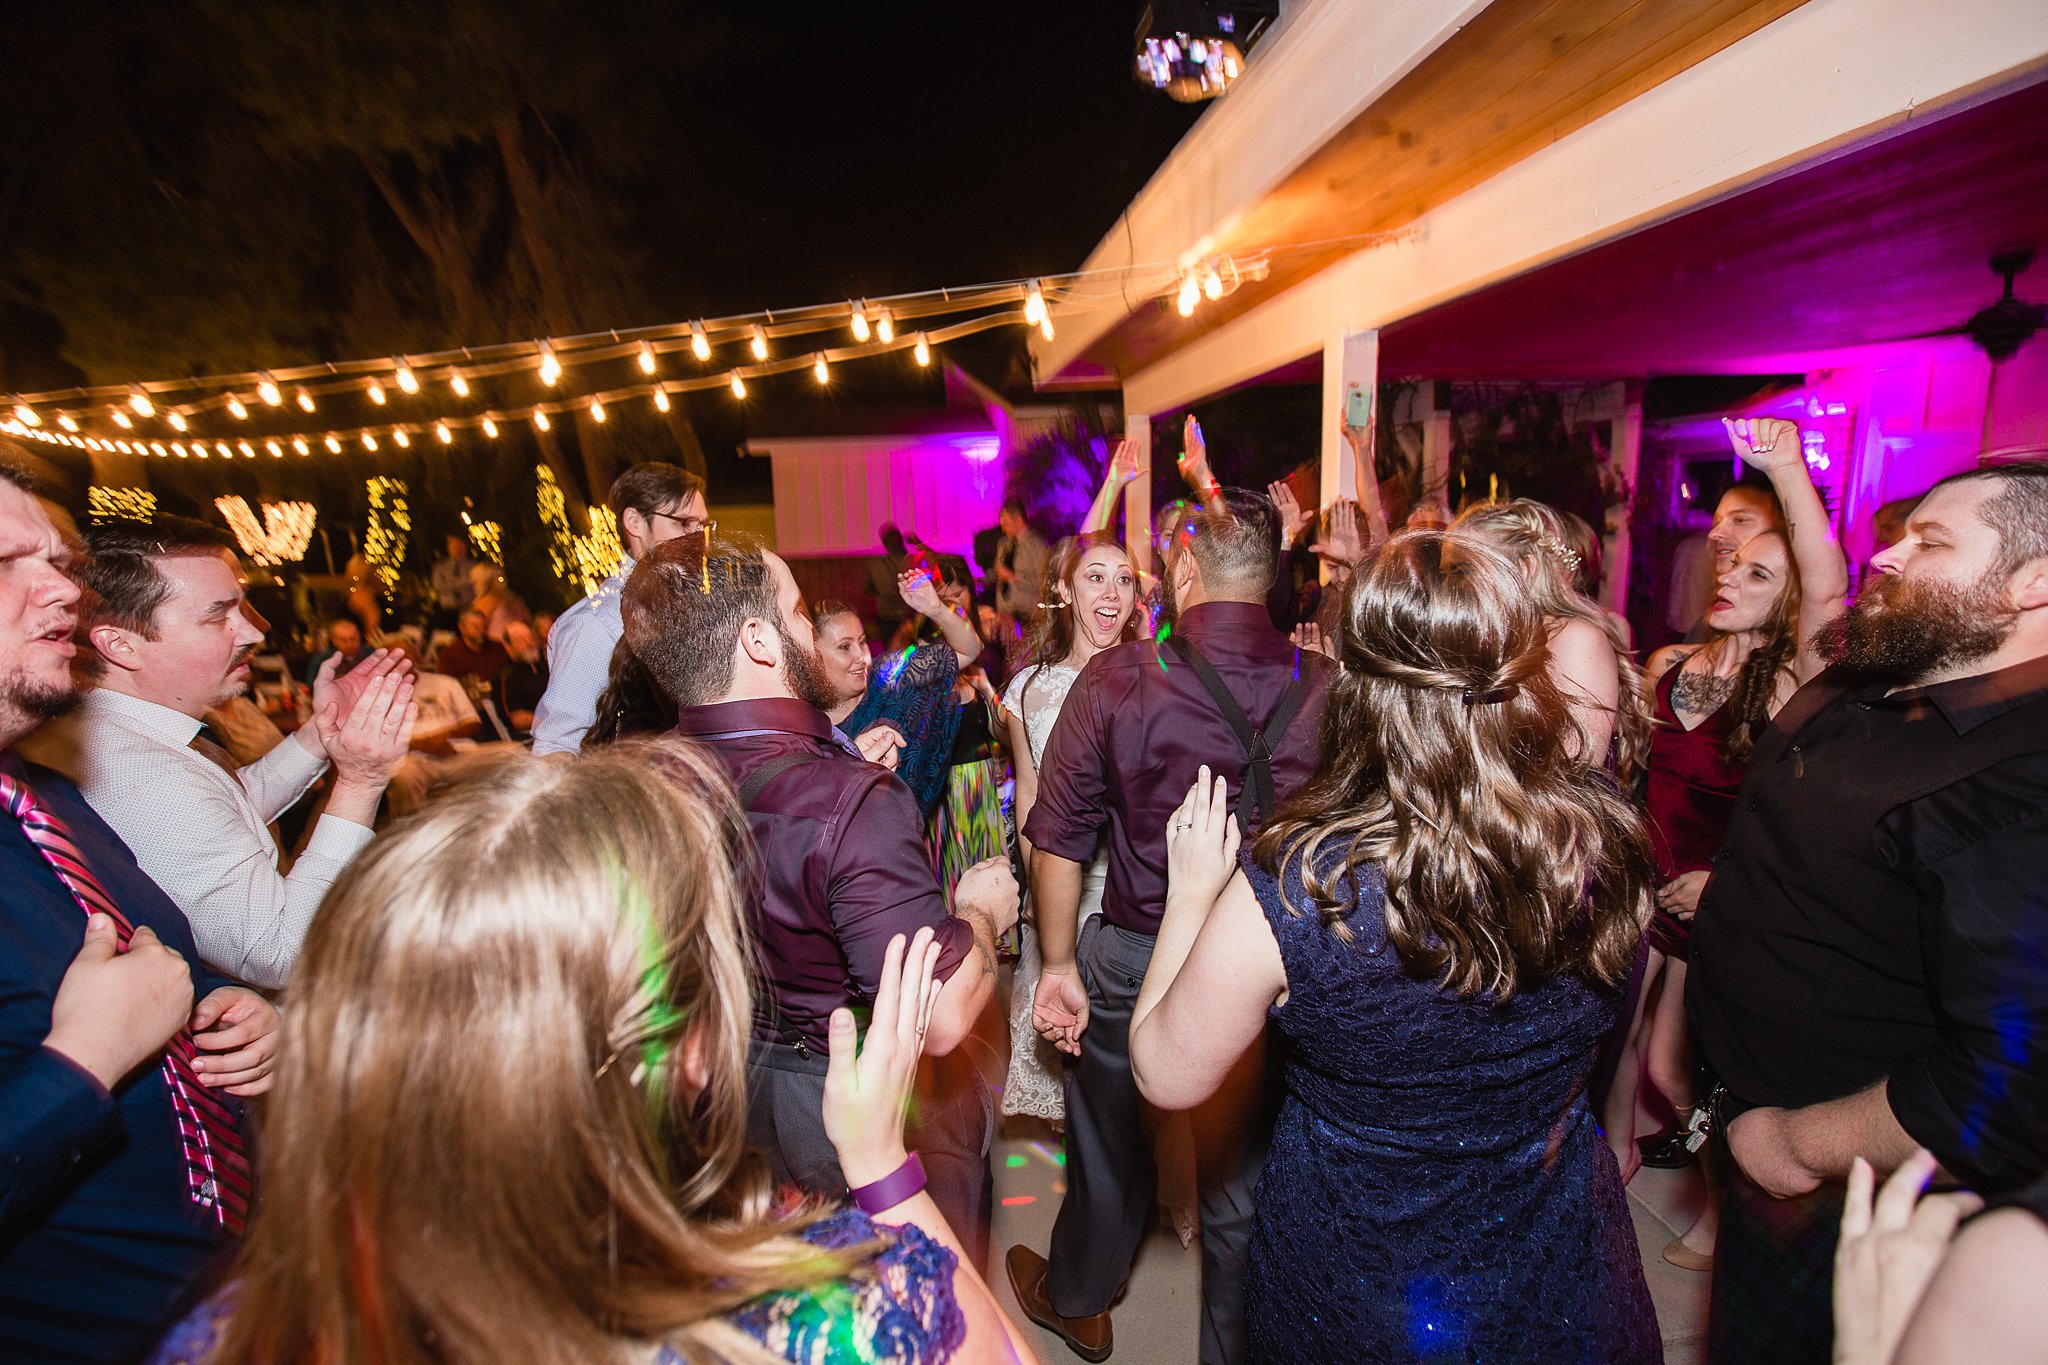 Bride and groom having a blast dancing with guests at their wedding reception by Arizona wedding photographer PMA Photography.